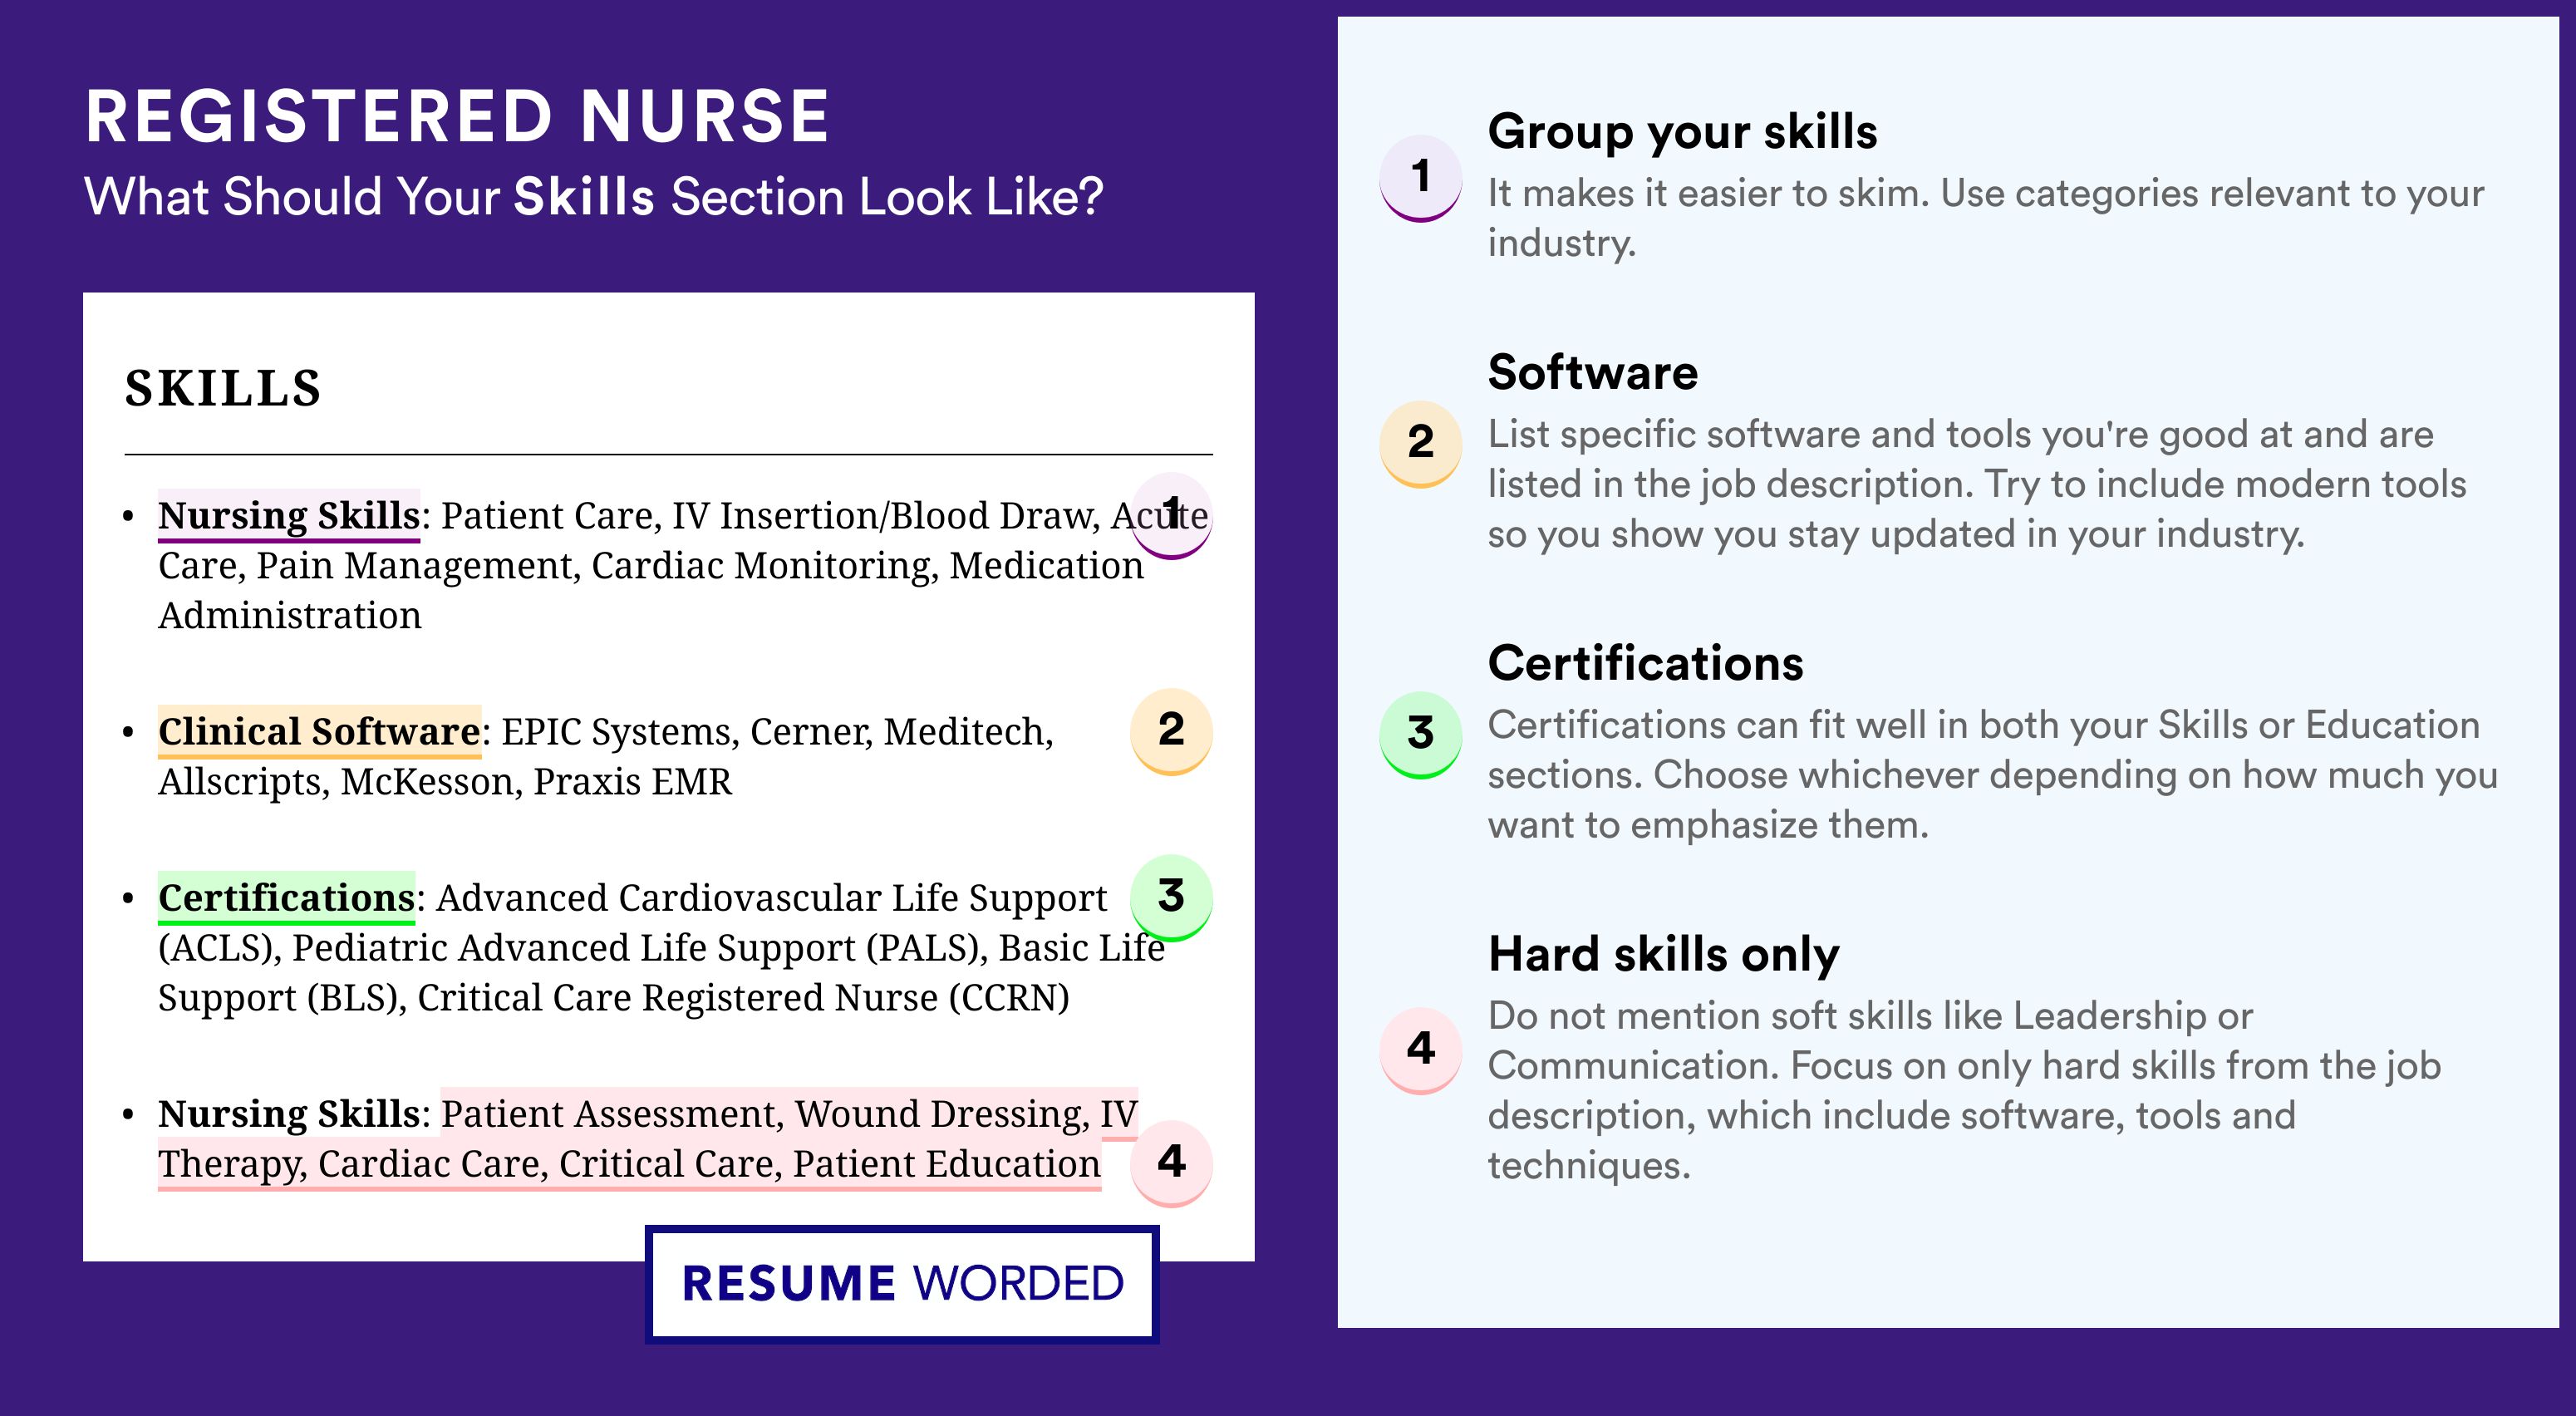 How To Write Your Skills Section - Registered Nurse Roles